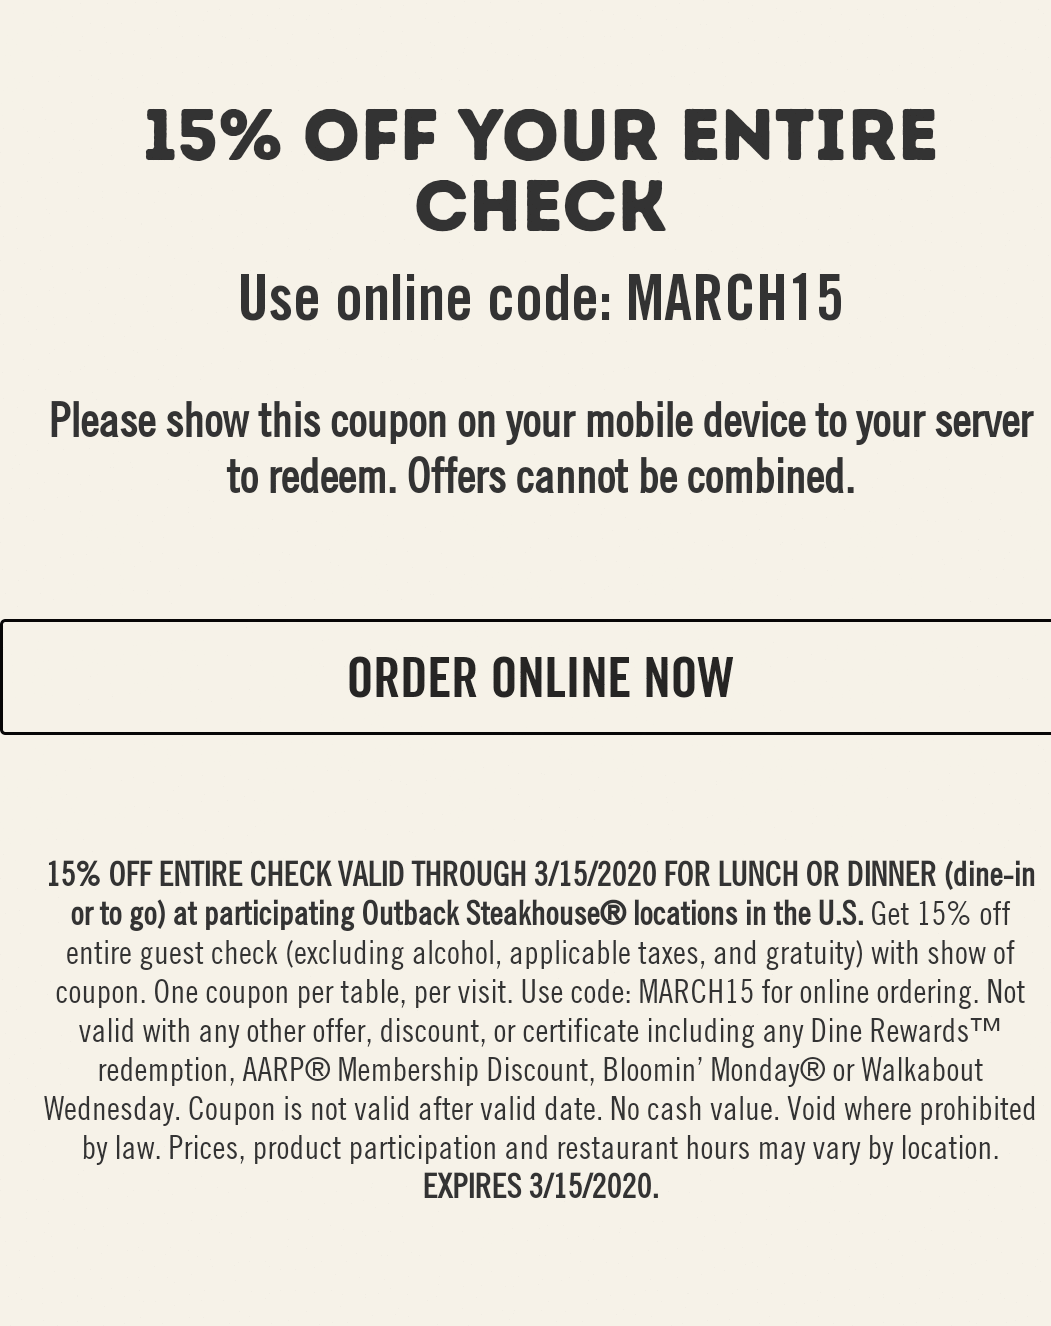 Outback Steakhouse Coupon - 15% Off Entire Check - Expires March 15, 2020